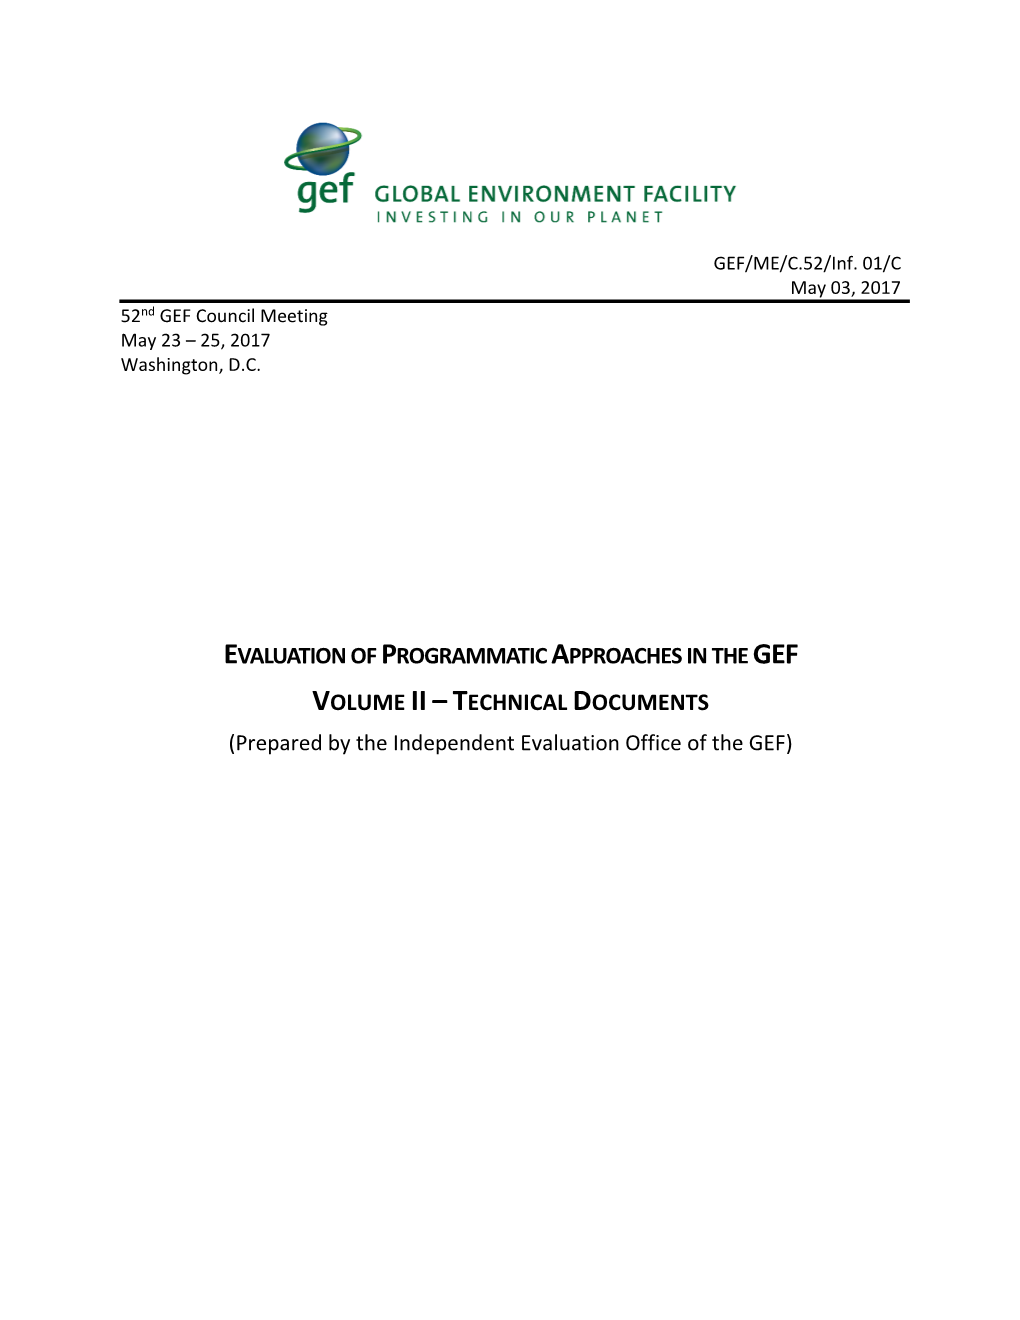 EVALUATION of PROGRAMMATIC APPROACHES in the GEF VOLUME II–T ECHNICAL DOCUMENTS (Prepared by the Independent Evaluation Office